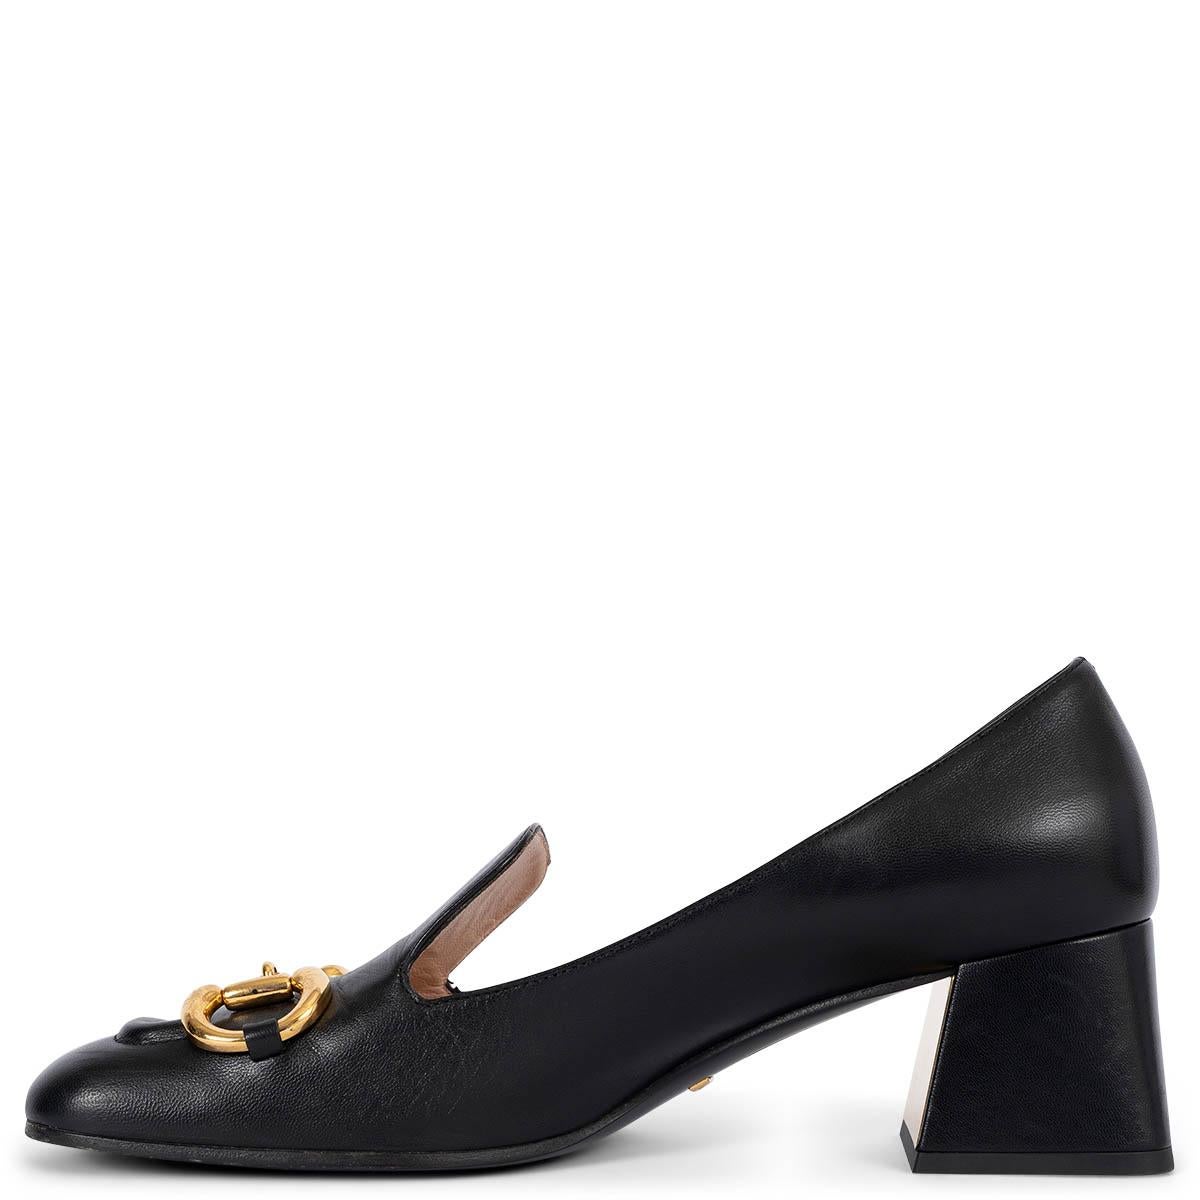 GUCCI black leather HORSEBIT MID HEEL Pumps Shoes 39 fit 40 In Excellent Condition For Sale In Zürich, CH